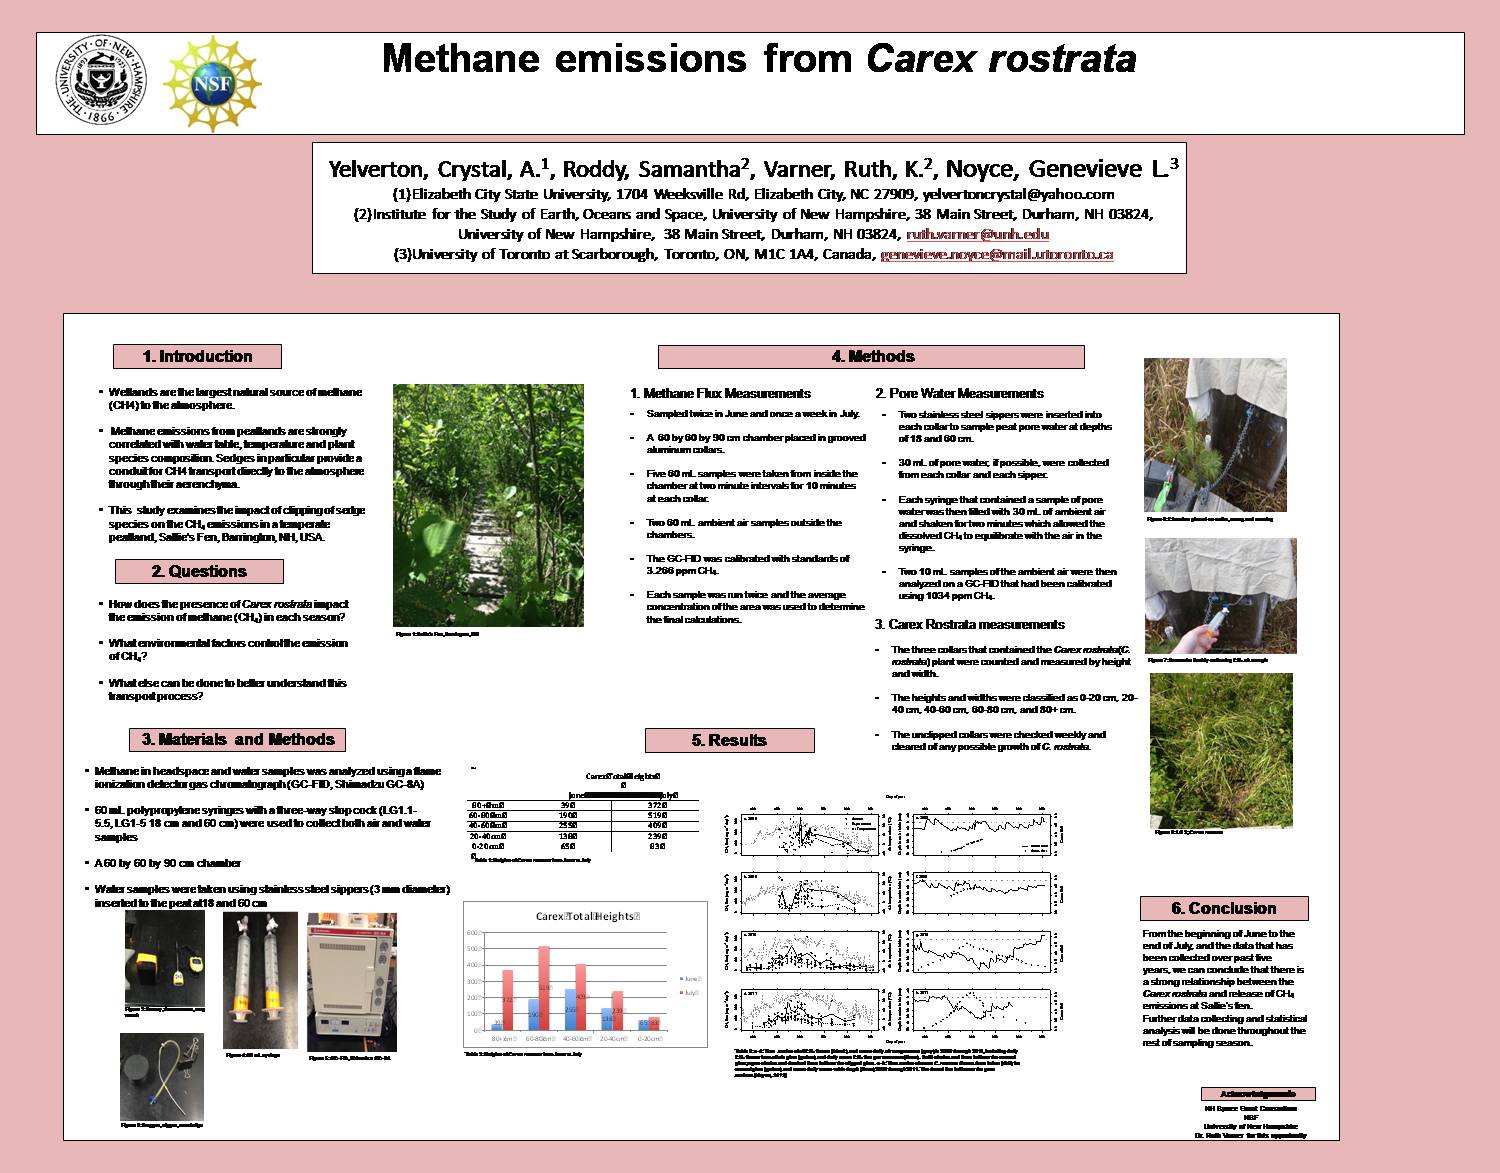 Methane Emissions From Carex Rostrata by Yelverton_C